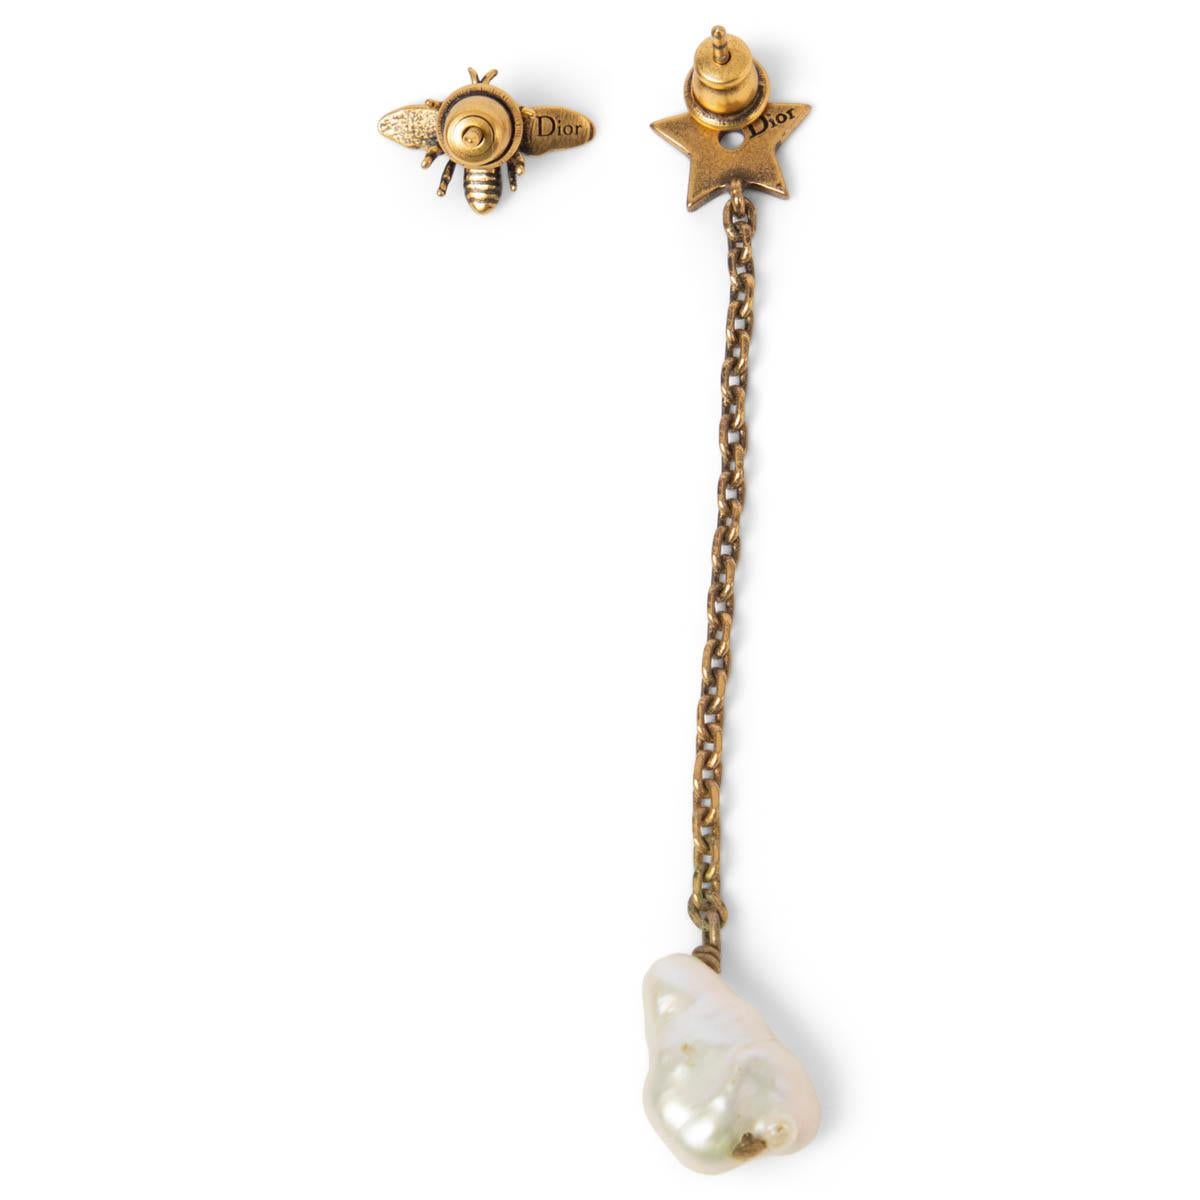 100% authentic Christian Dior earrings in aged gold-tone metal. One is bee stud the to other a star dangle earring with CD faux pearl. Have been worn and are in excellent condition.

Measurements
Width	0.9cm (0.4in)
Length	6.5cm (2.5in)

All our